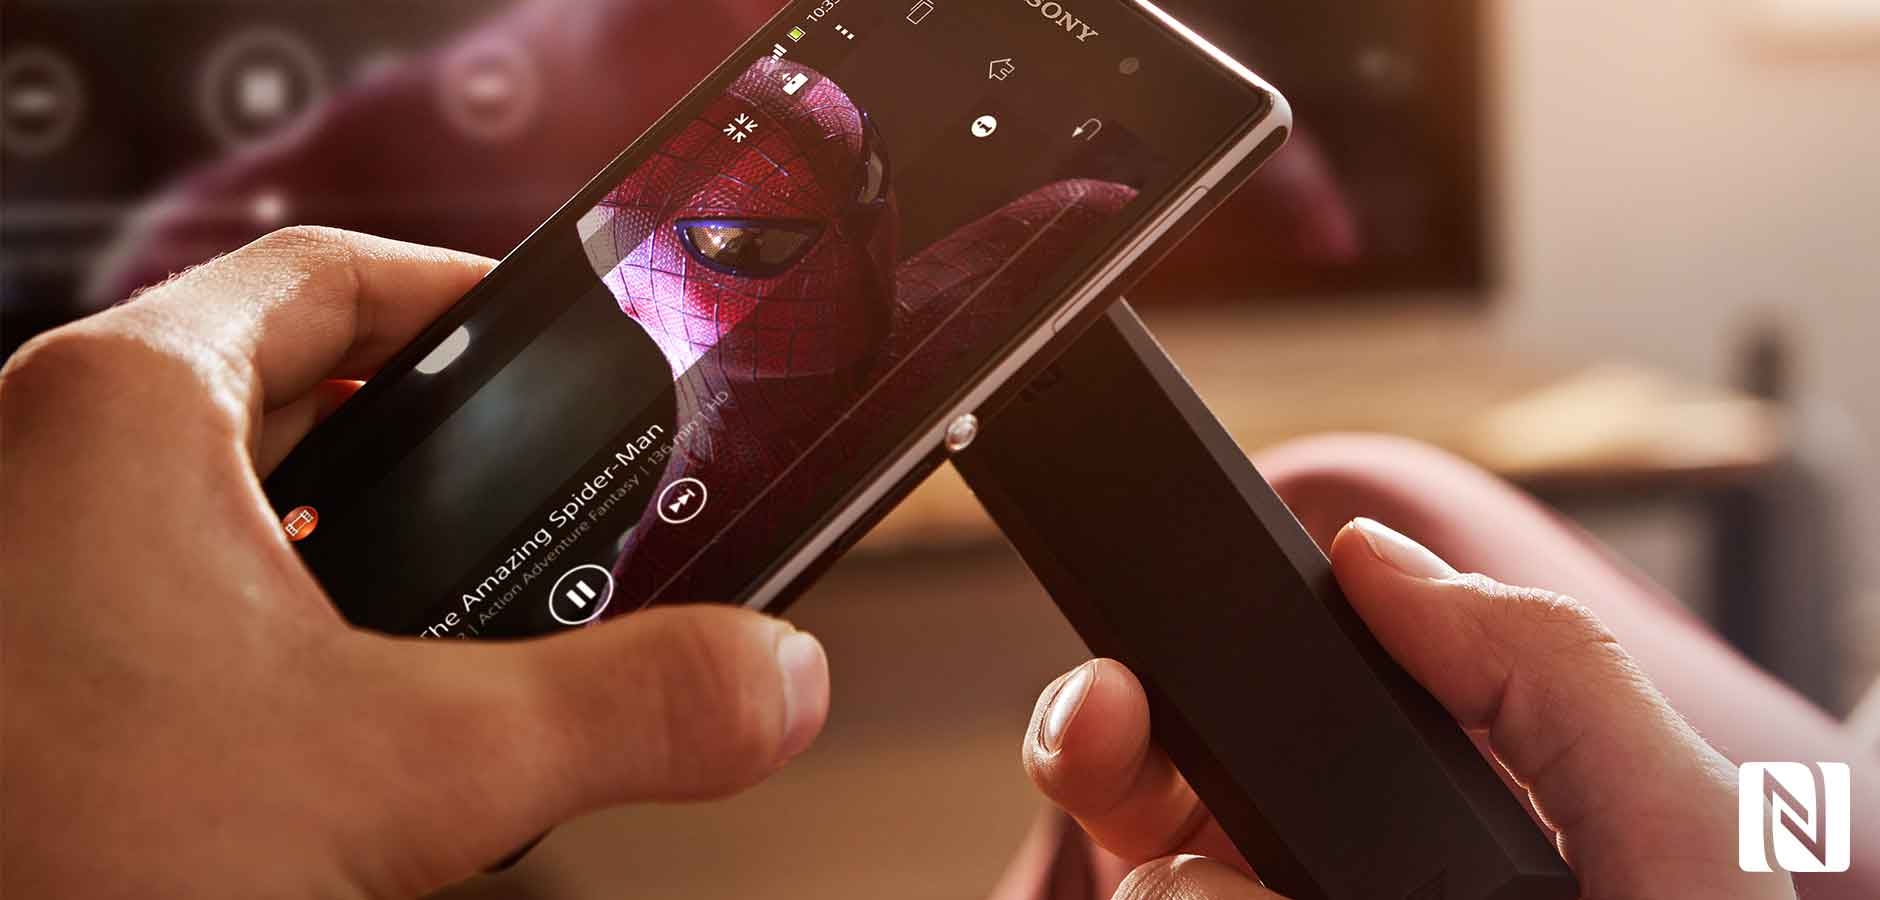 Connecting to other devices is easy with NFC and the Xperia Z1 Android smartphone.